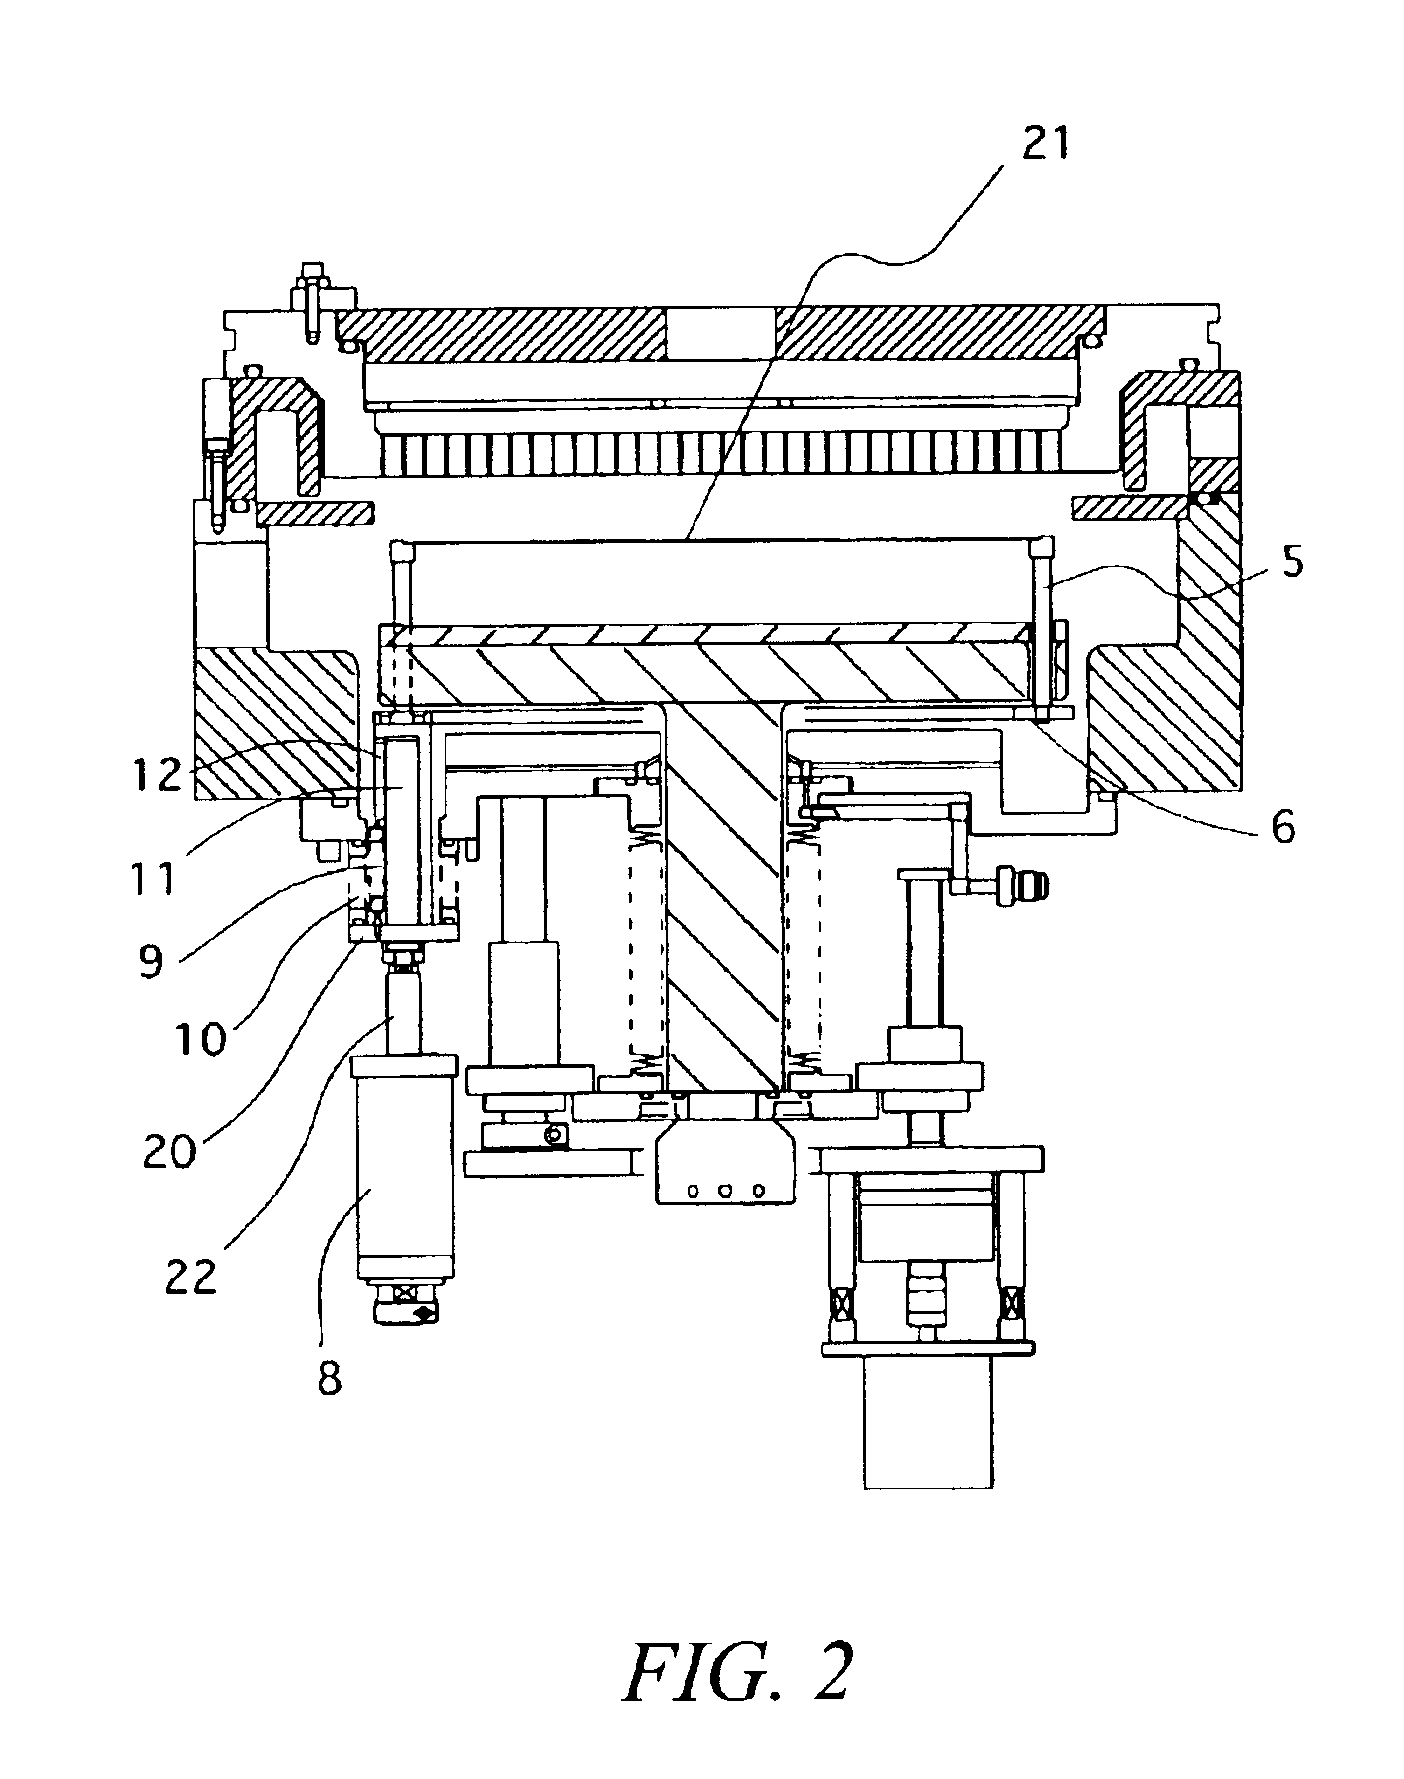 Semiconductor-processing reaction chamber